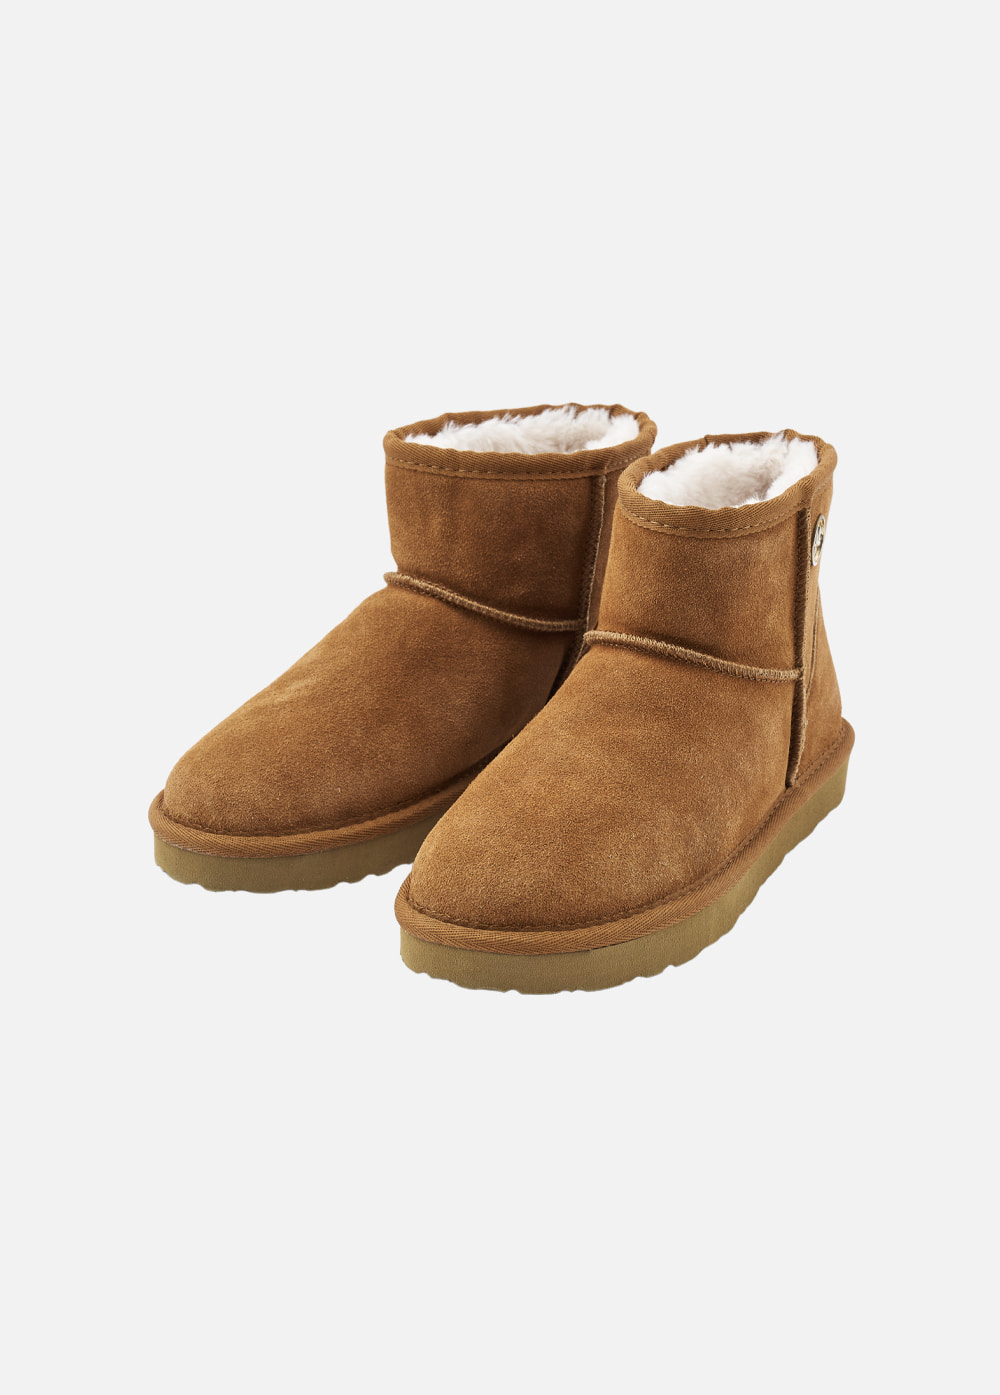 W CIRCLE LOGO ROUND SUEDE BOOTS brown